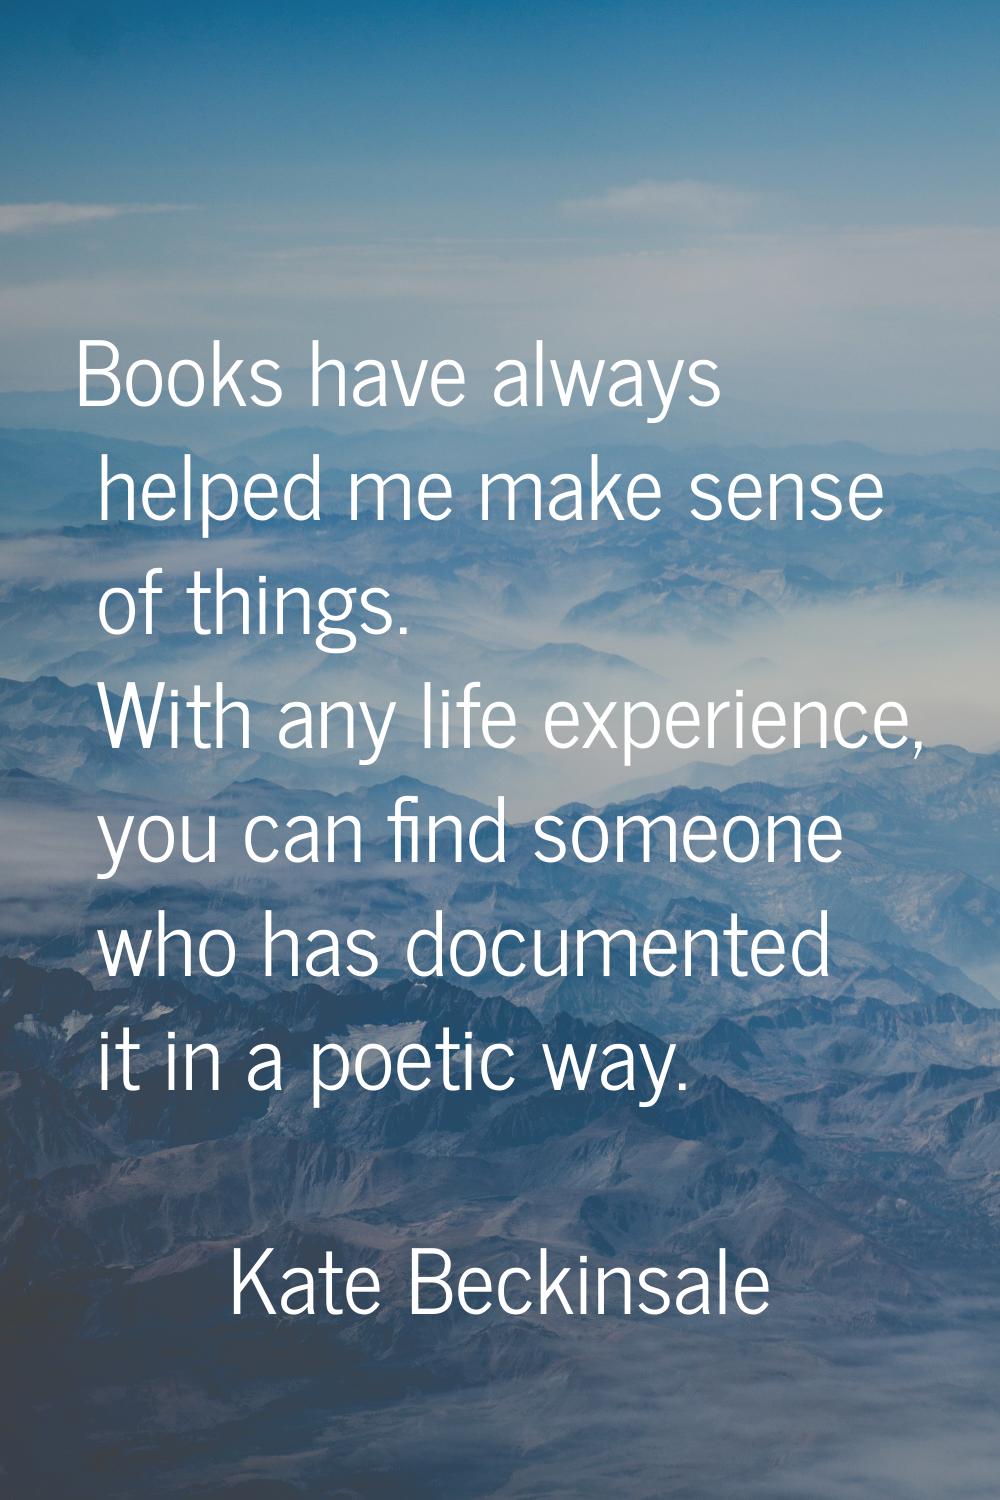 Books have always helped me make sense of things. With any life experience, you can find someone wh